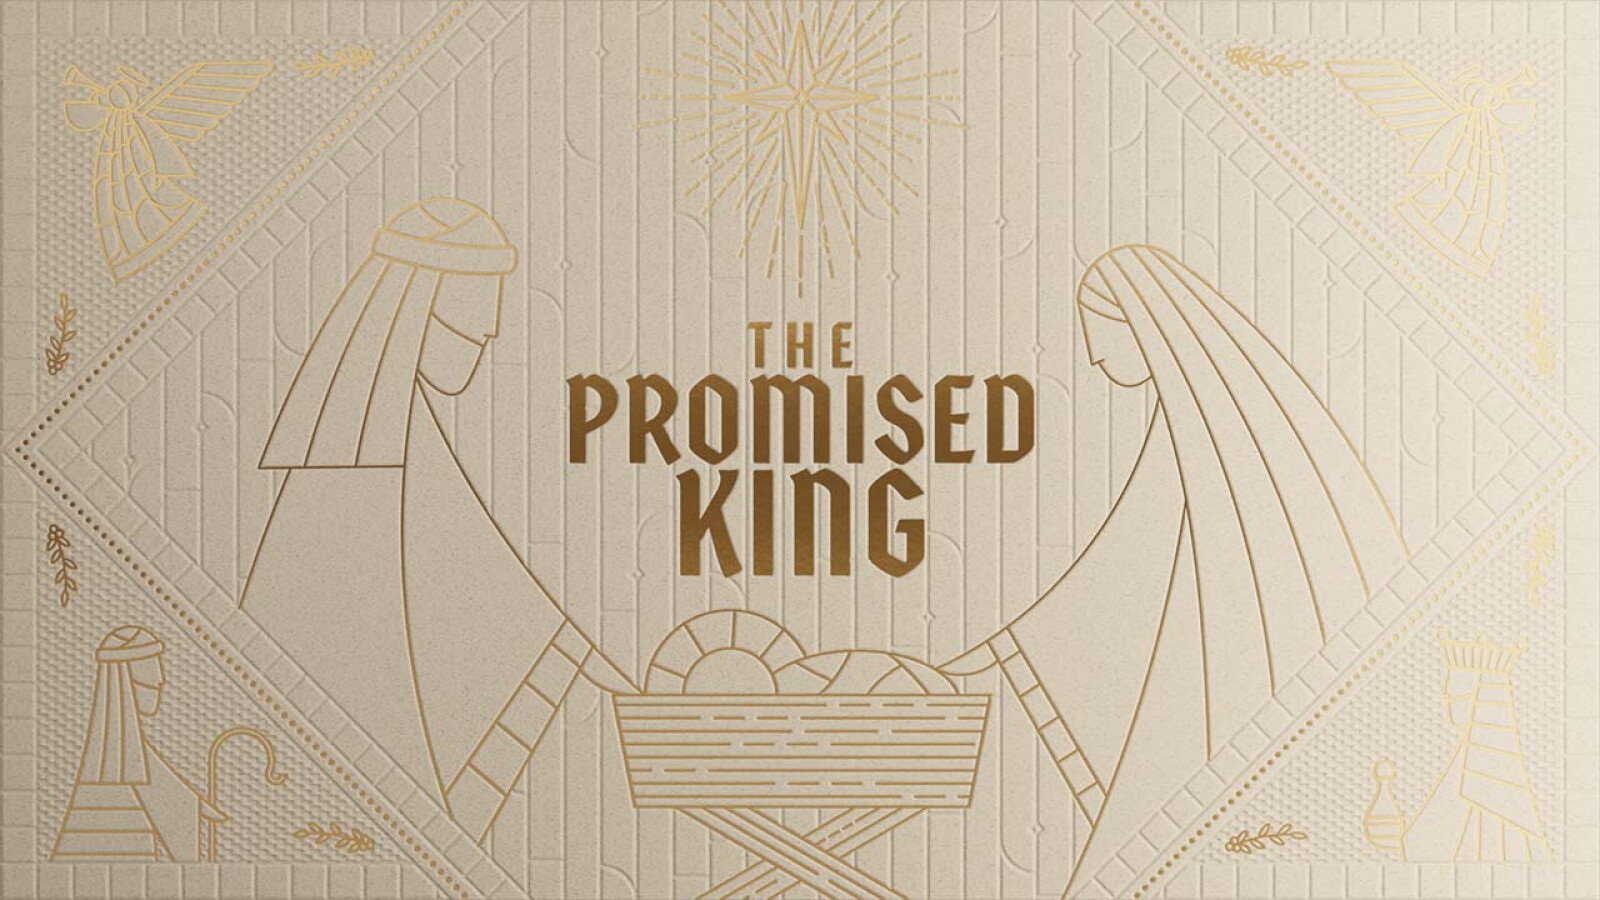 The Promised King